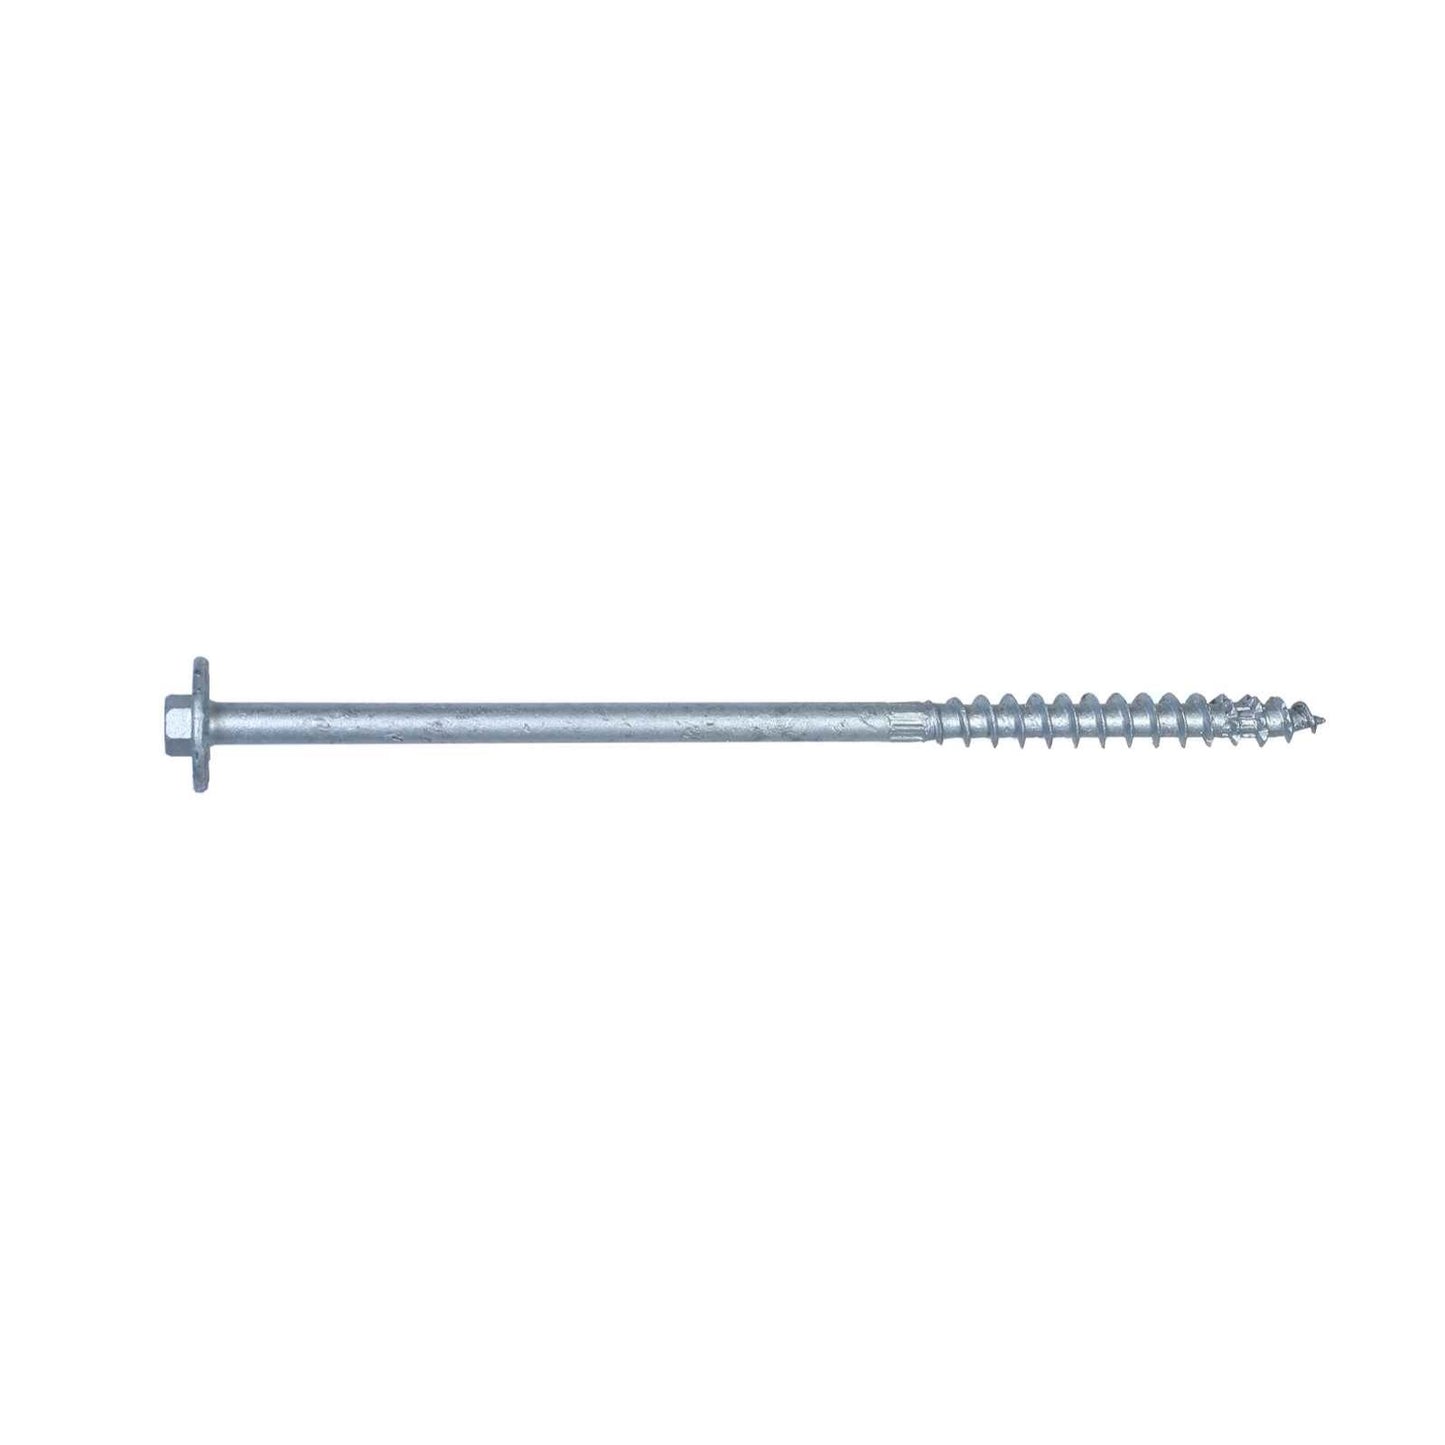 0276 inch x 8 inch StrongTie SDWH Timber Screw Hot Dipped Galvanized Pkg 150